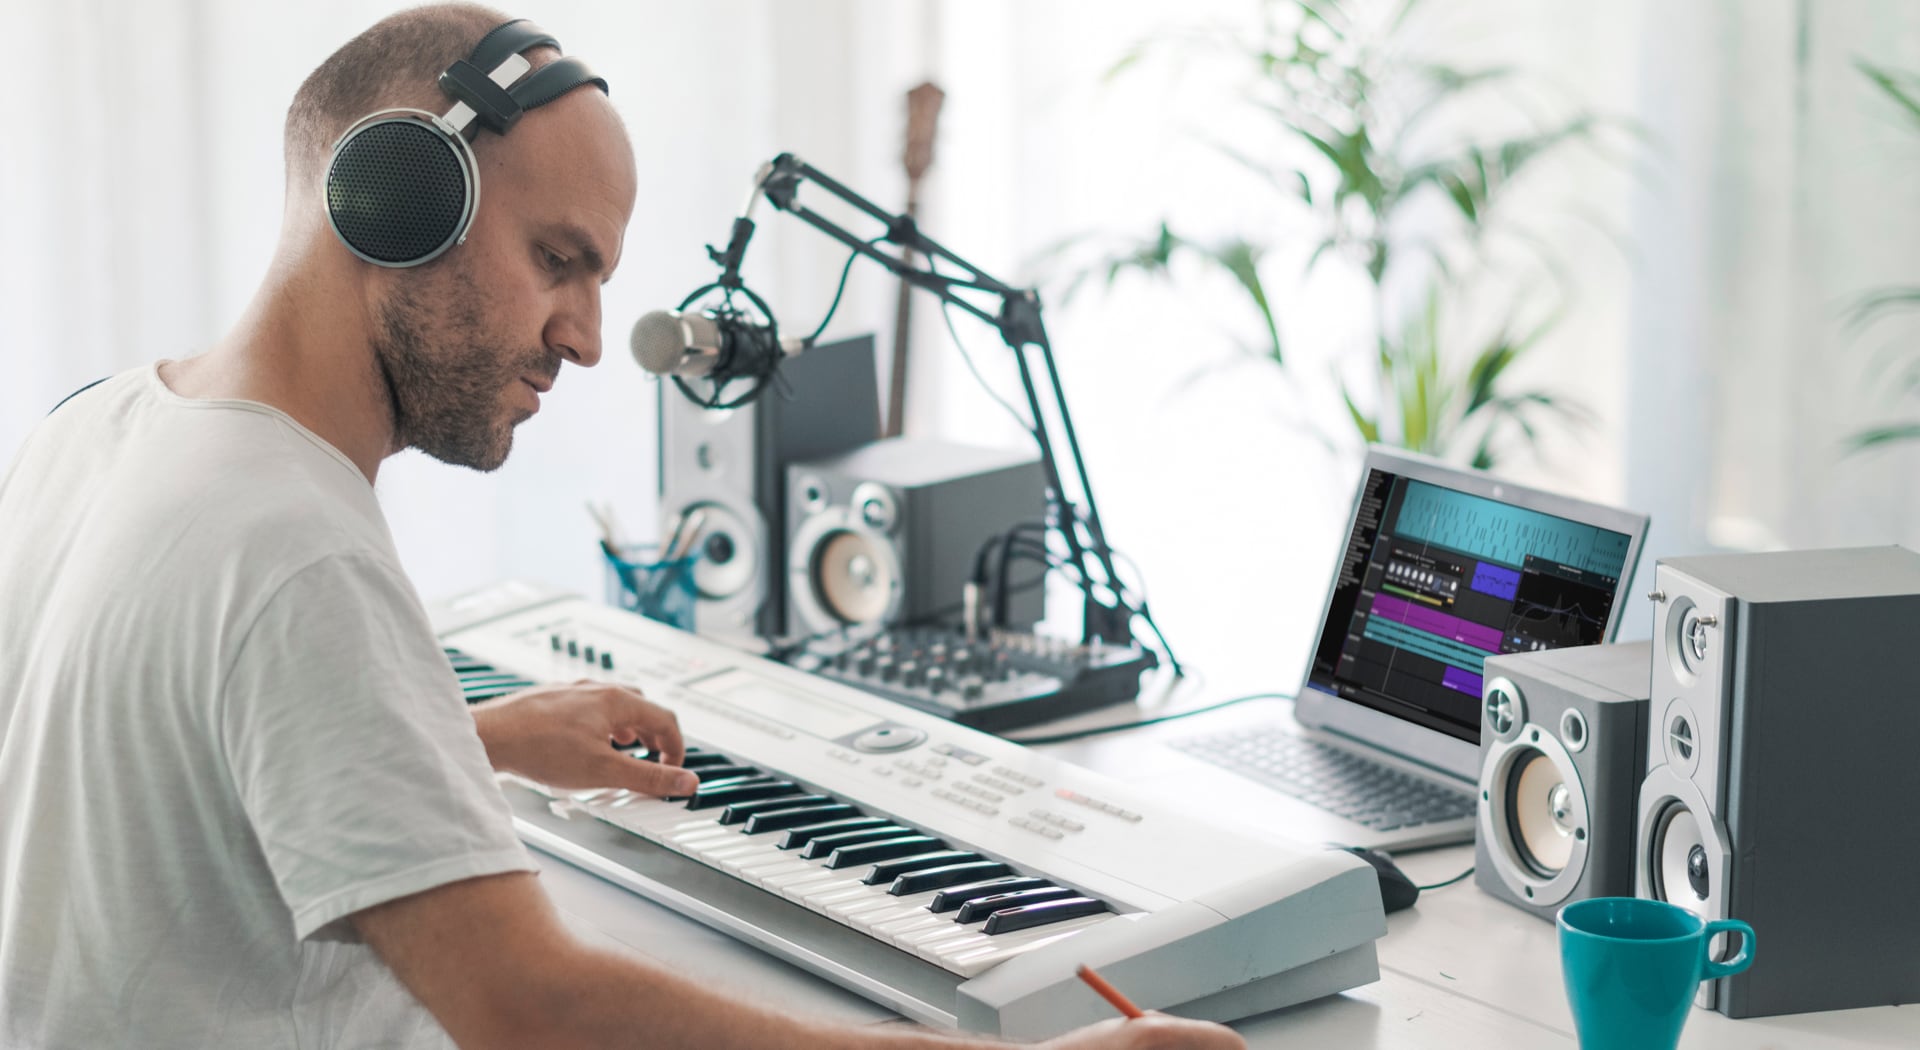 How To Make Music On Digital Audio Software